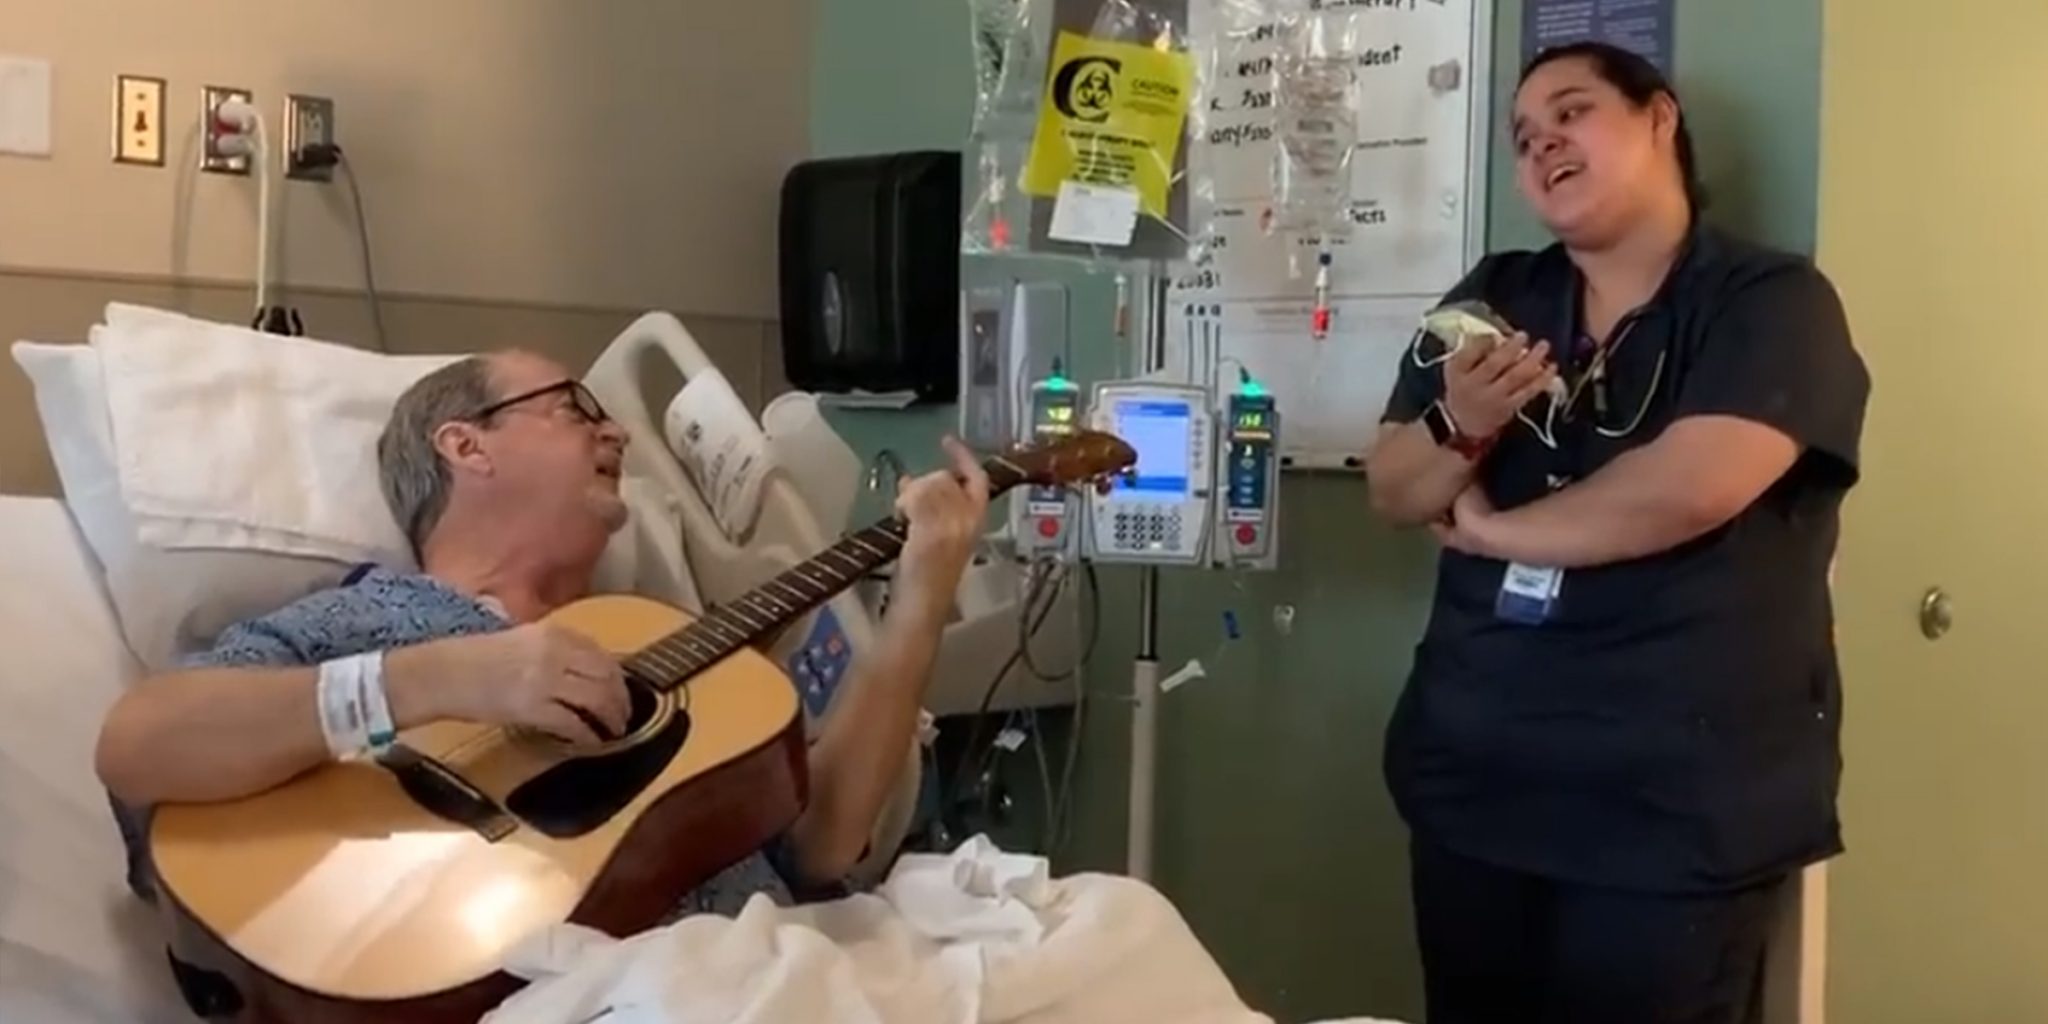 chemo patient sings "o holy night" with nurse